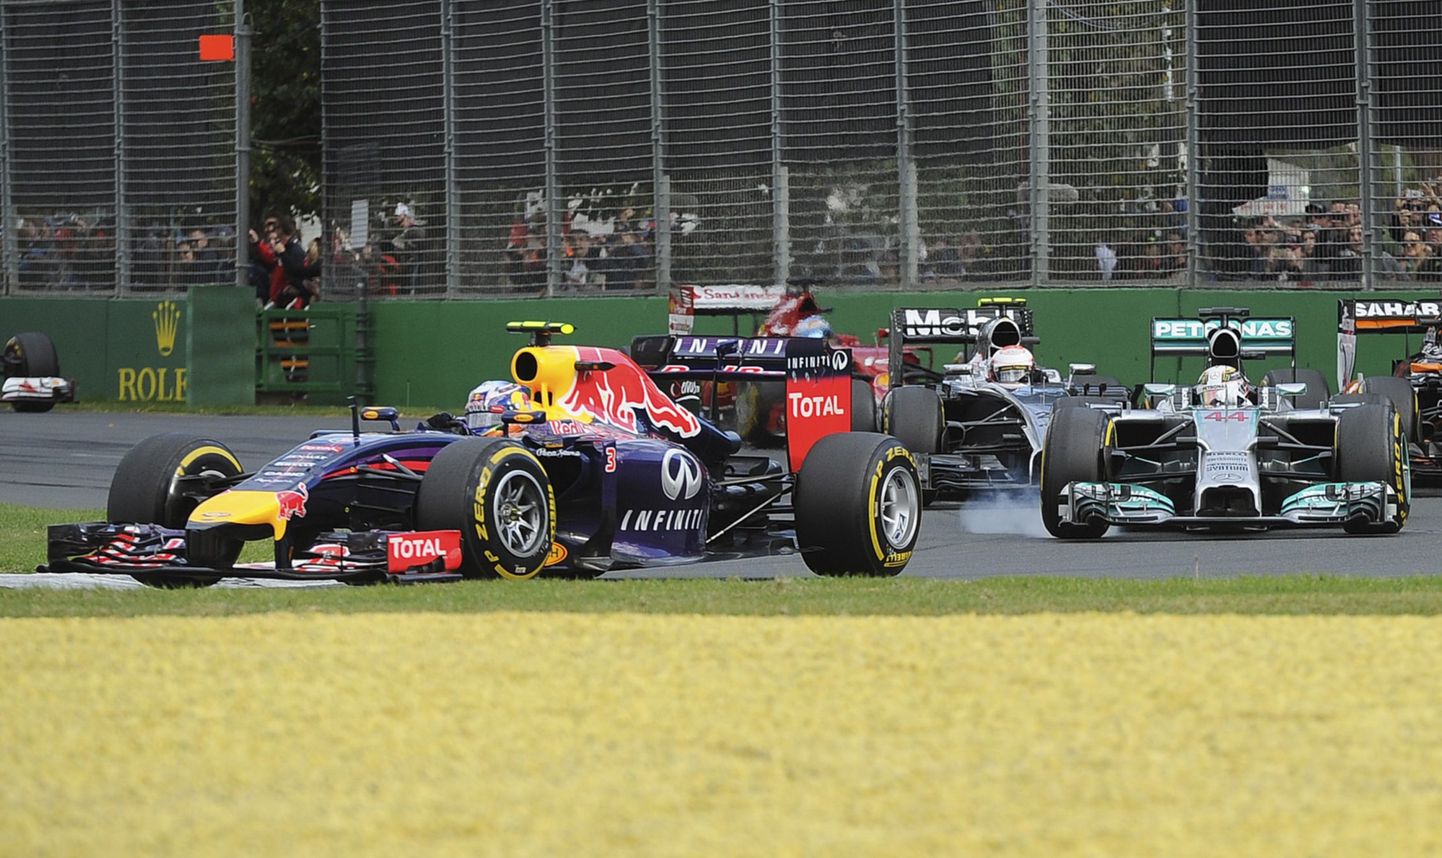 Red Bull driver Daniel Ricciardo of Australia, left, leads Mercedes driver Lewis Hamilton of Britain, right, during the Australian Formula One Grand Prix at Albert Park in Melbourne, Australia, Sunday, March 16, 2014. Mercedes driver Nico Rosberg of Germany won the race after pole sitter and teammate Hamilton plus world champion Sebastian Vettel suffered early retirements. Ricciardo finished second to become the first Australian to finish on the podium in his home race. (AP Photo/Andy Brownbill) / TT / kod 436